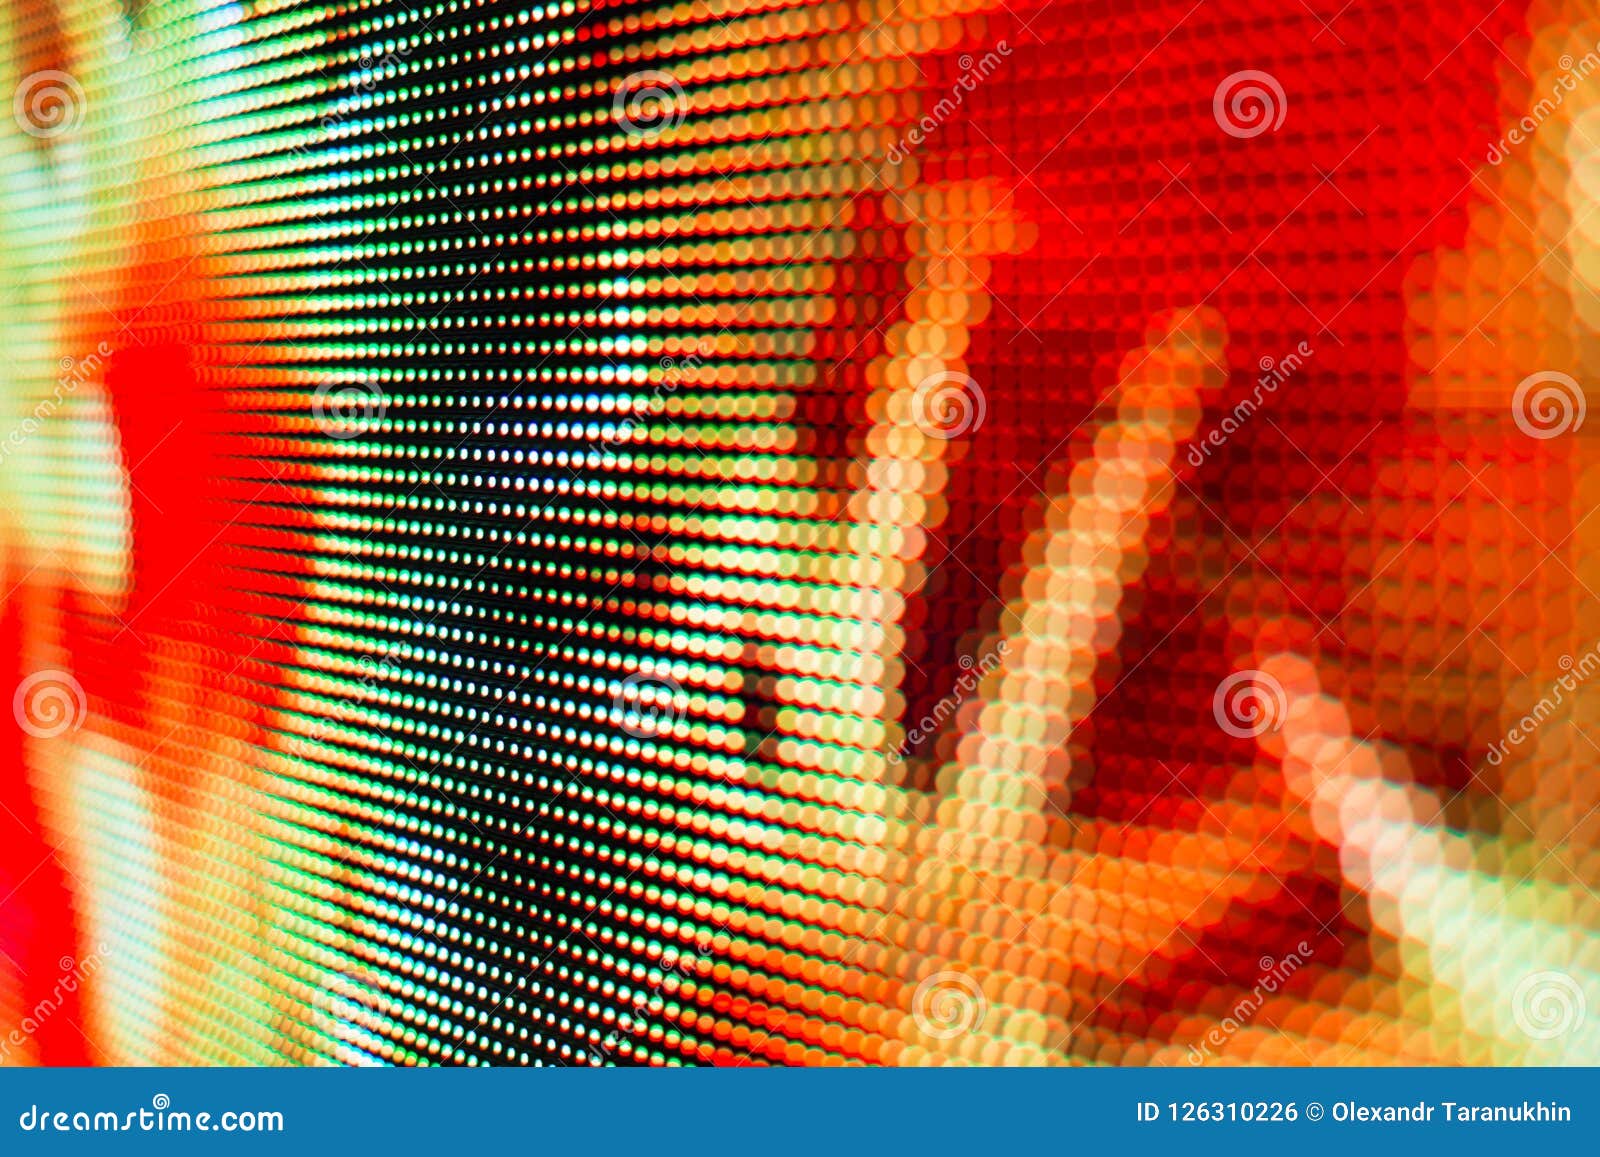 Bright Colored Light LED Smd Screen Stock Photo - Image of digital